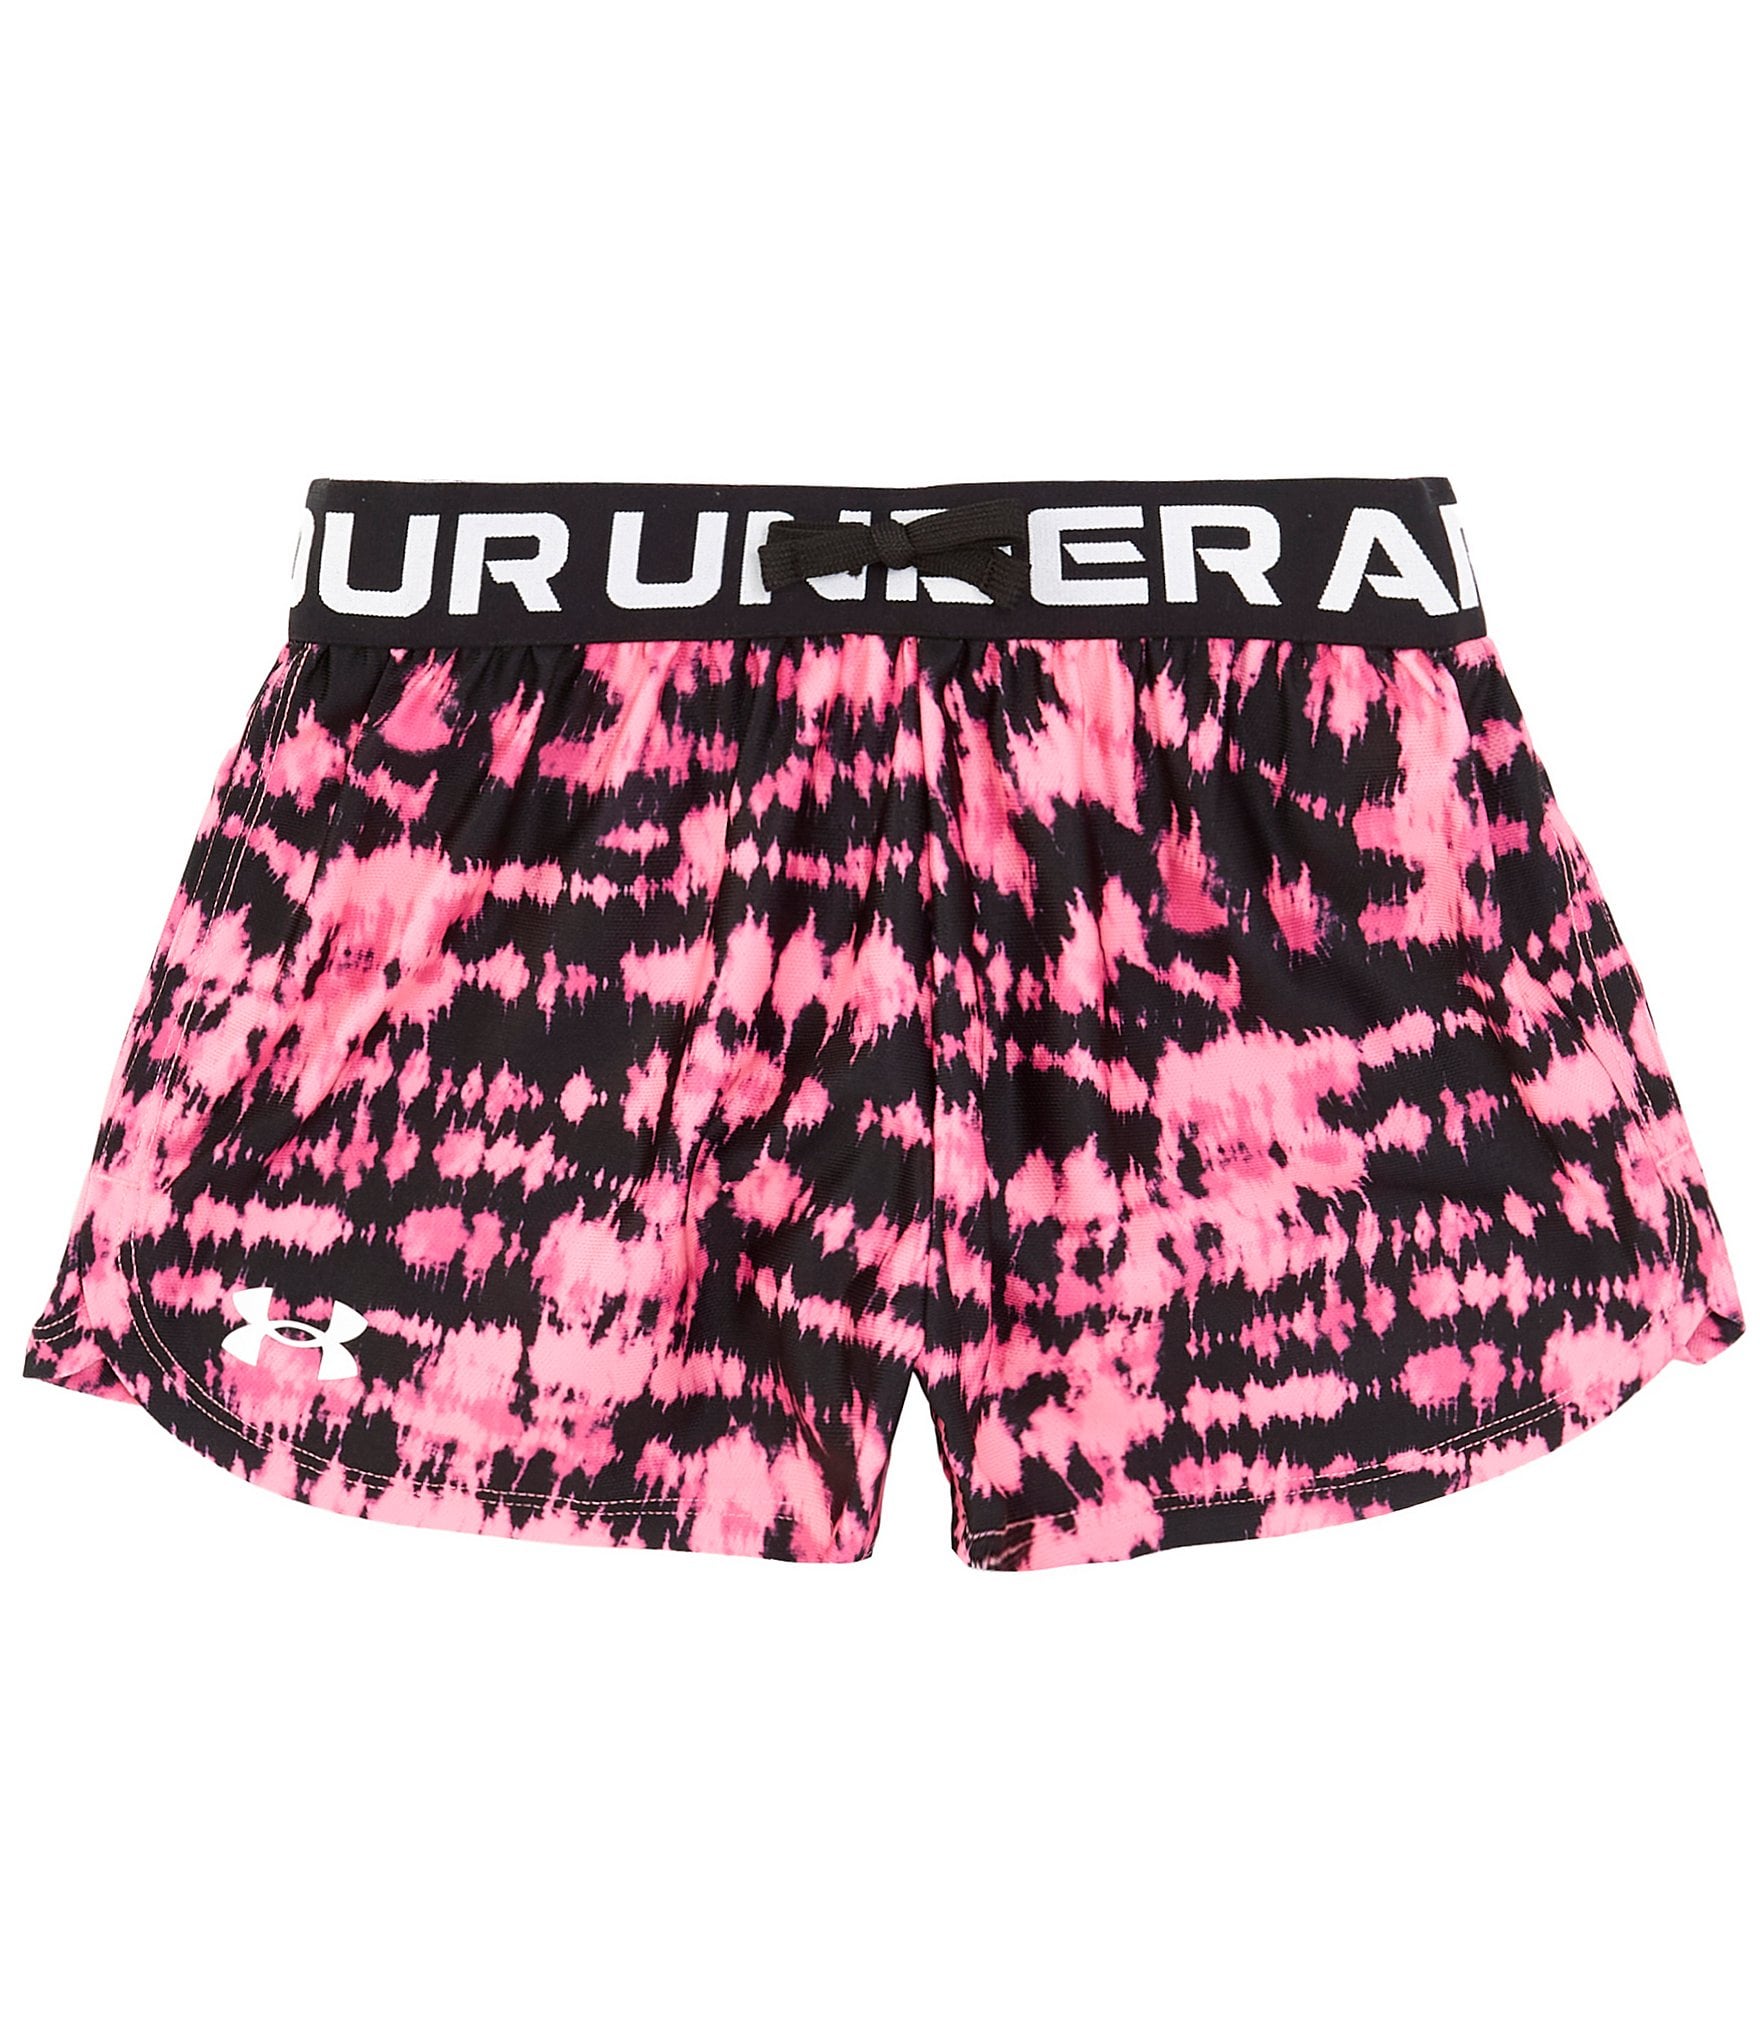 Under Armour Heat Gear Shorts Womens XS Black Pink Fitted 2.5